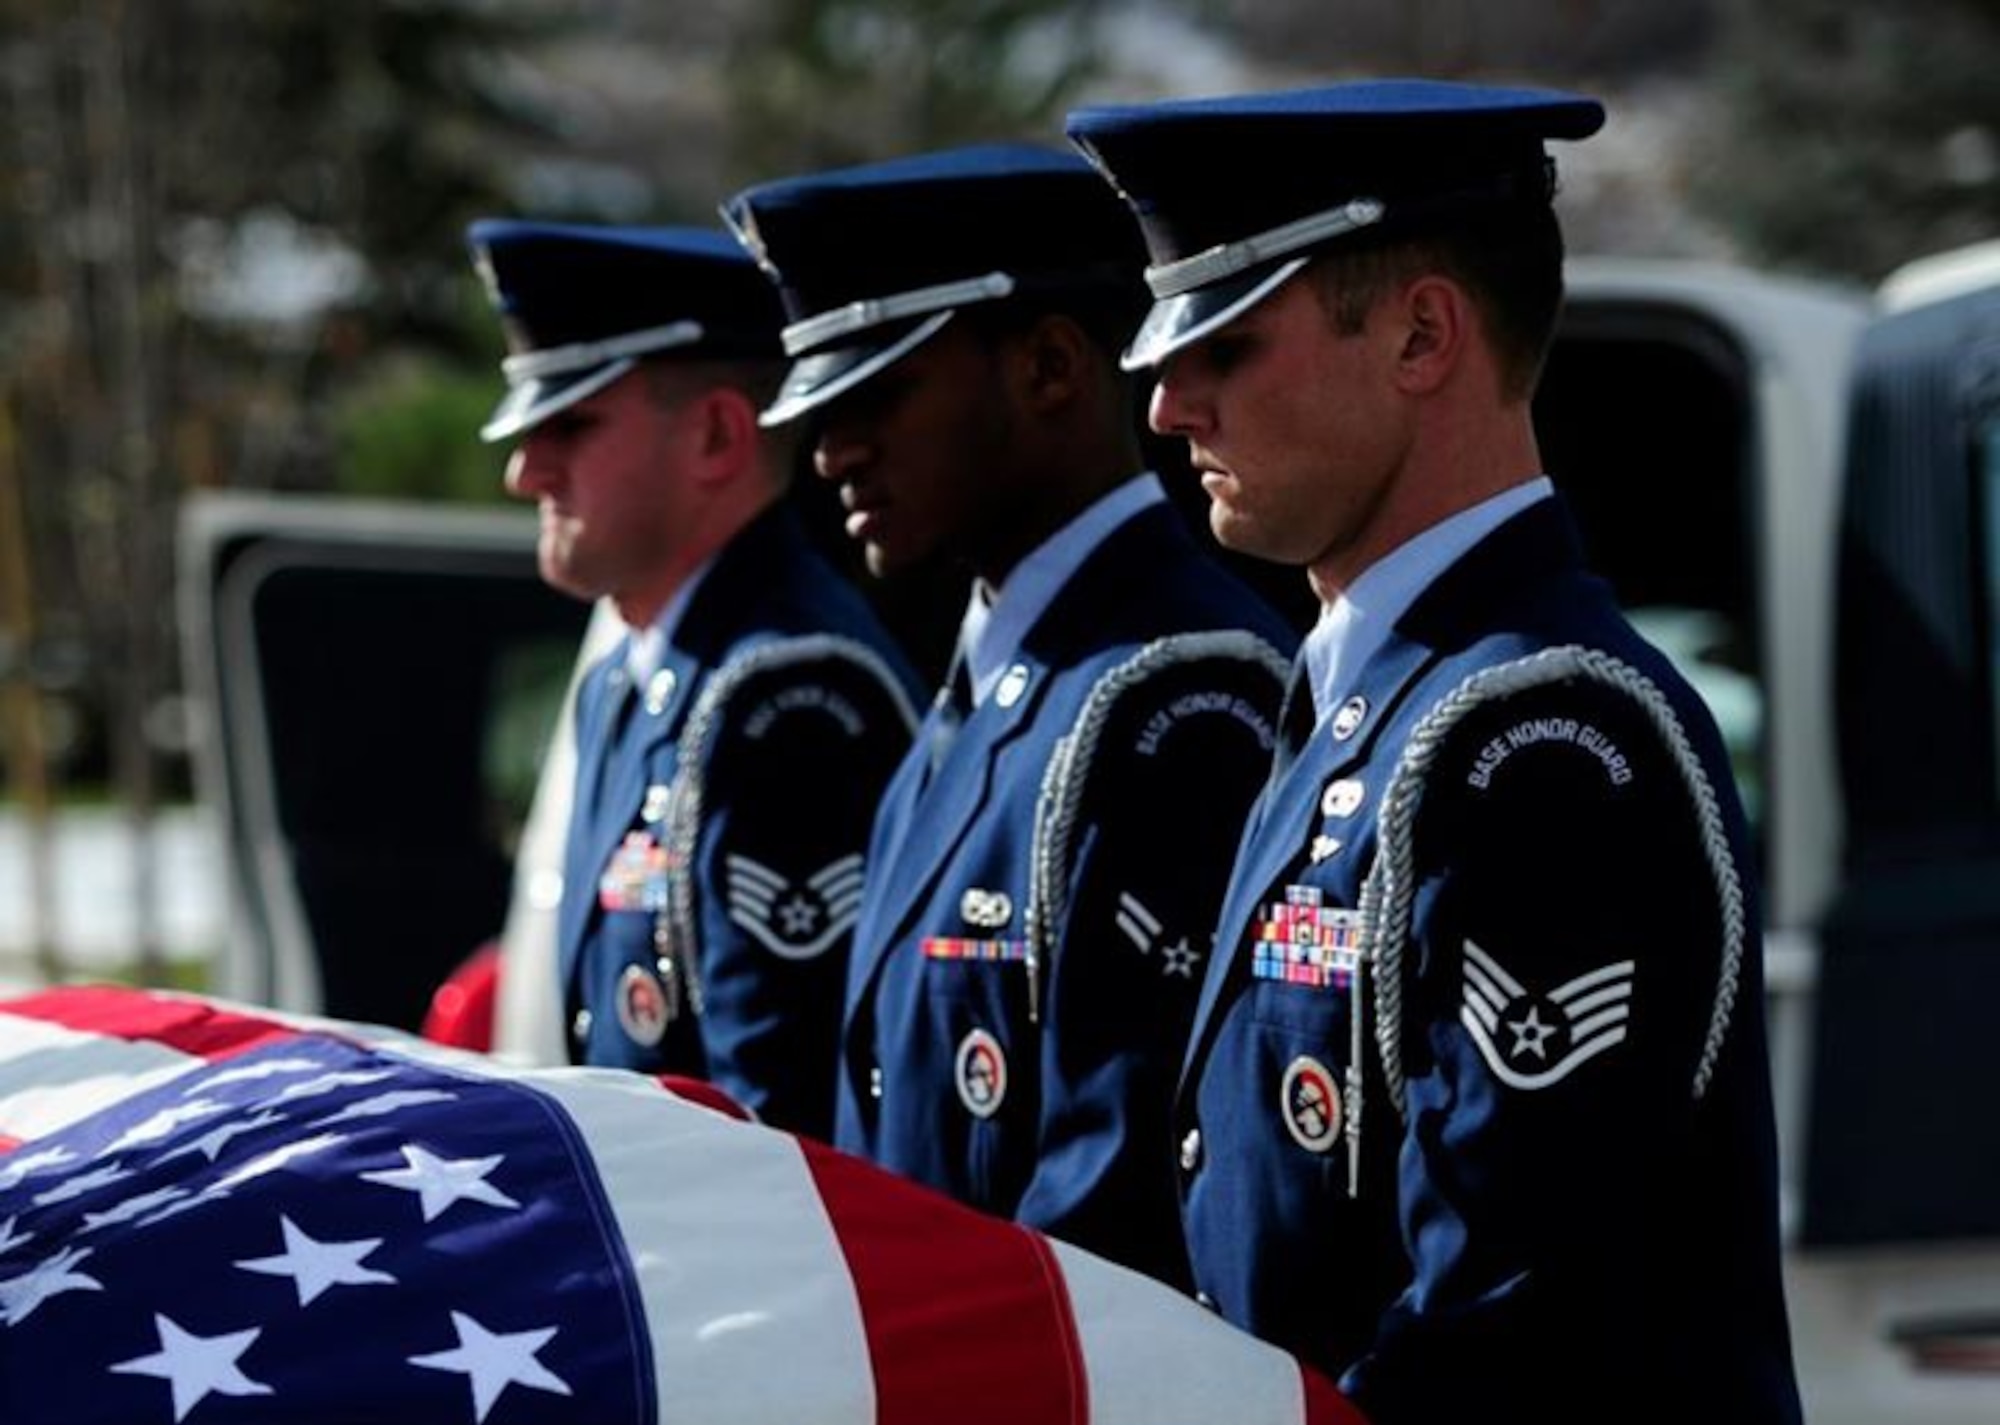 The U.S. Hill Air Force Base Honor Guard proceeds a funeral at Veterans Memorial Park, Utah, held for retired U.S. Air Force Master Sgt. Richard Schildknecht, Nov. 15, 2012. The tasks that are carried out by the honor guard during the funeral include the carrying of the casket, folding of the American flag, and a three round volley. The flag and the spent rounds from the volley are given to the deceased's family. (U.S. Air Force photo/Airman 1st Class Justyn M. Freeman)